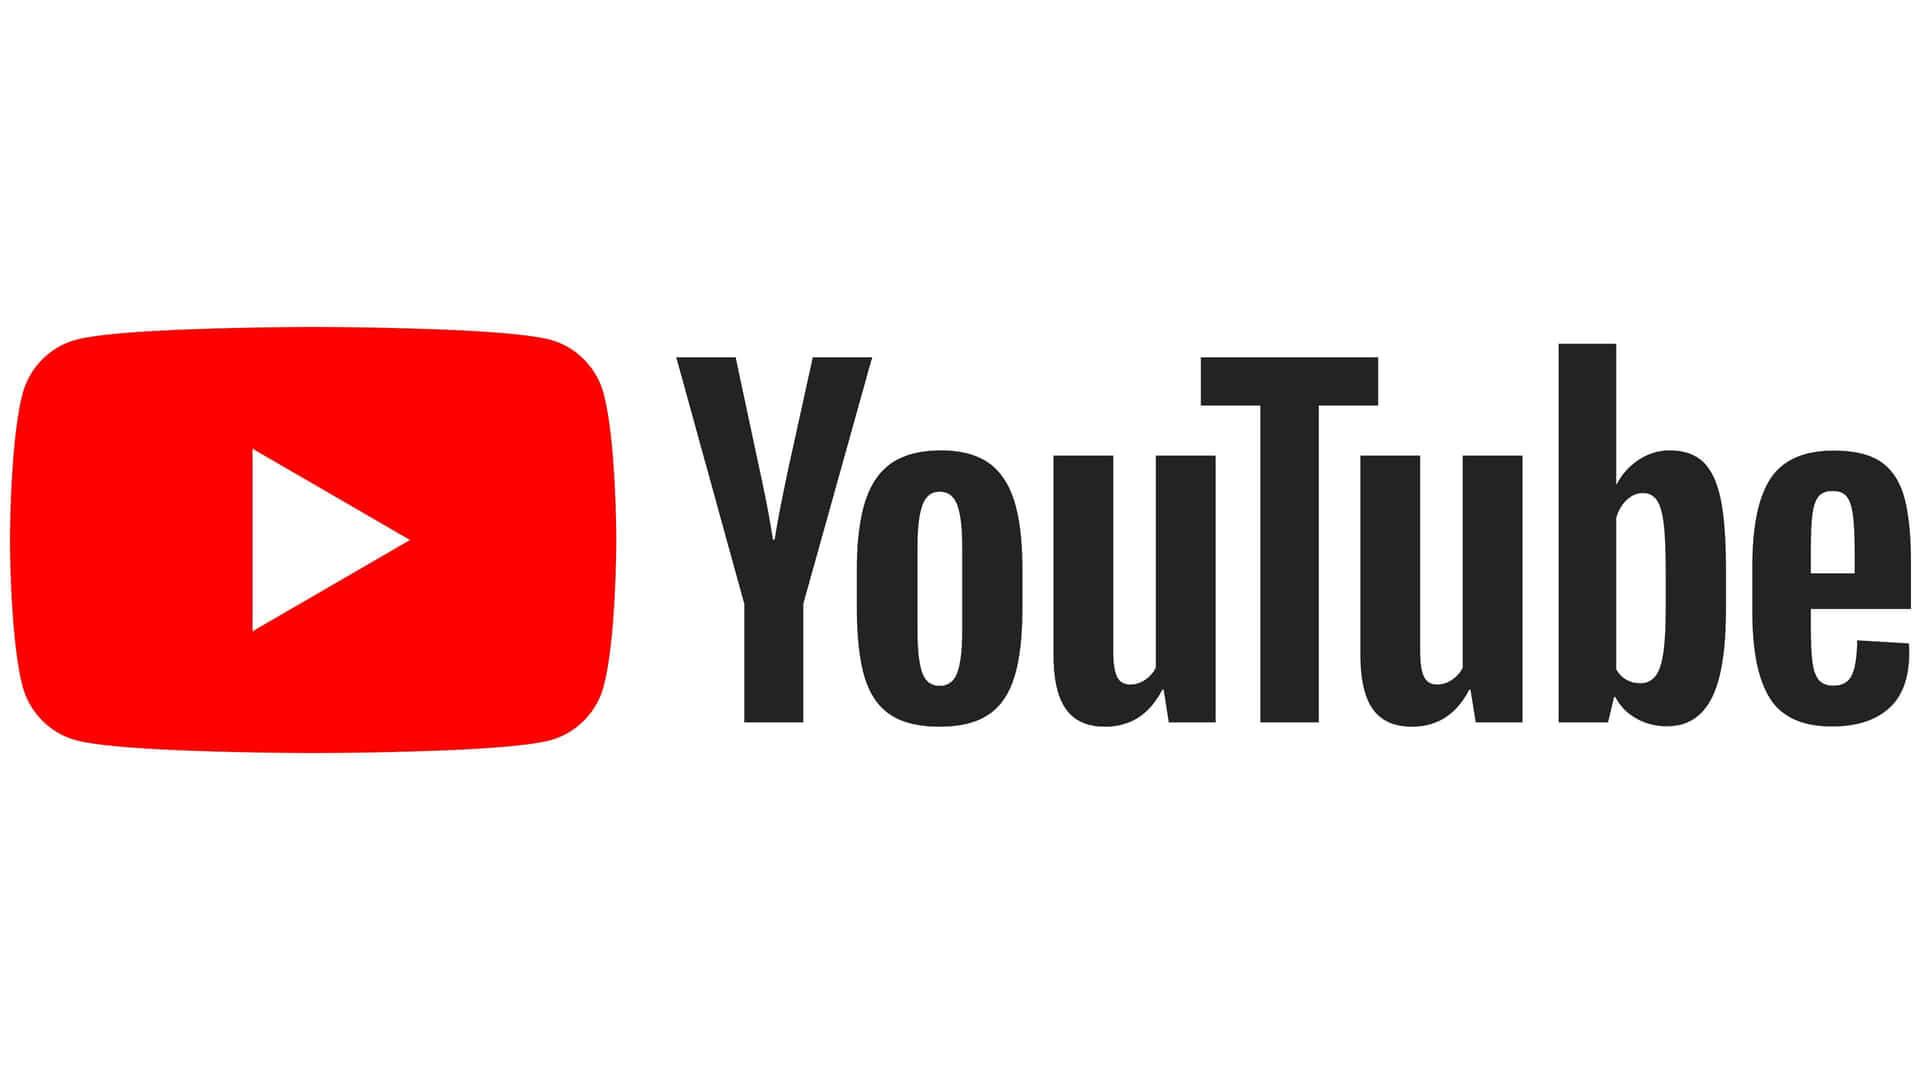 YouTube Logo on Black and Red Gradient